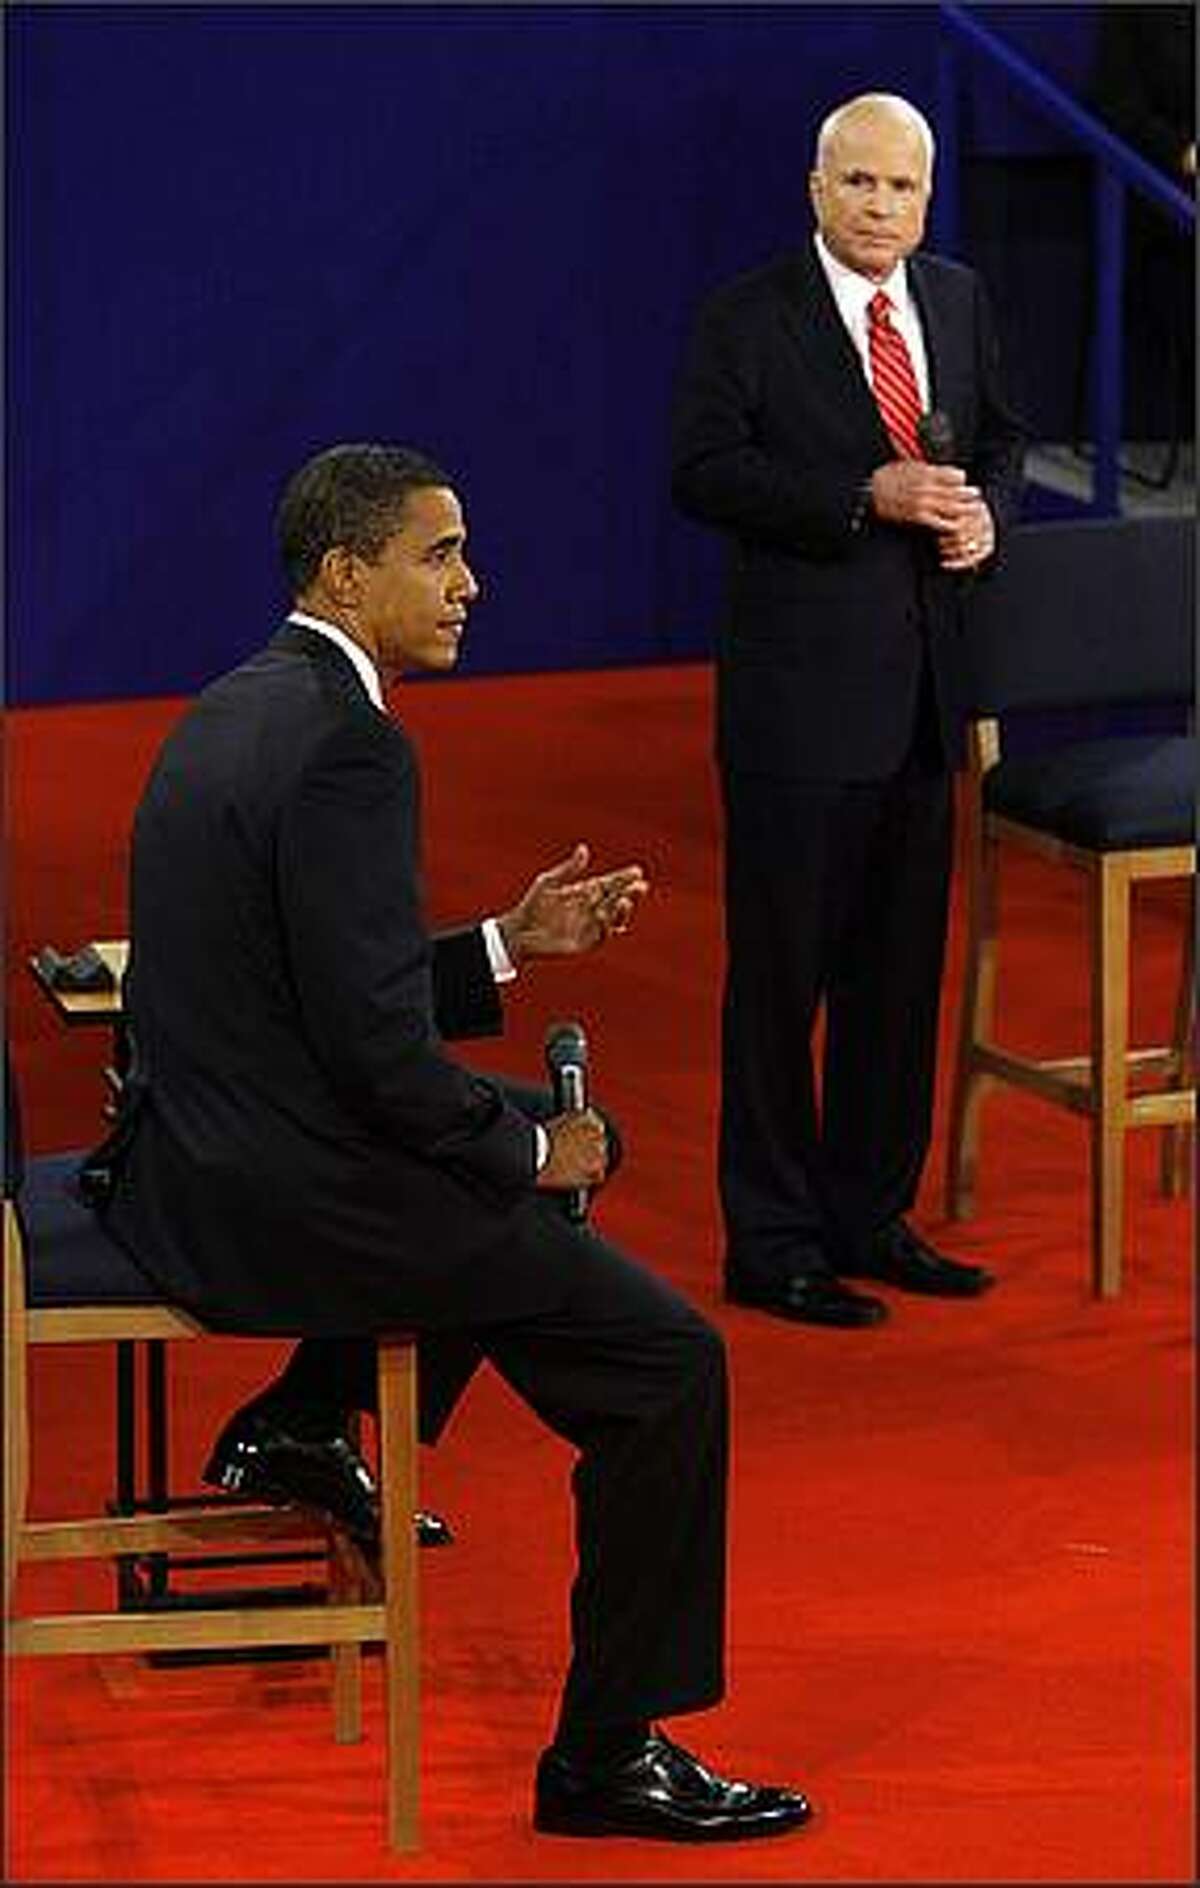 Democratic presidential candidate Sen. Barack Obama, D-Ill., answers a question as Republican presidential candidate Sen. John McCain, R-Ariz., listens at a townhall-style presidential debate at Belmont University in Nashville, Tenn., Tuesday, Oct. 7, 2008. (AP Photo/Charles Dharapak, Pool)